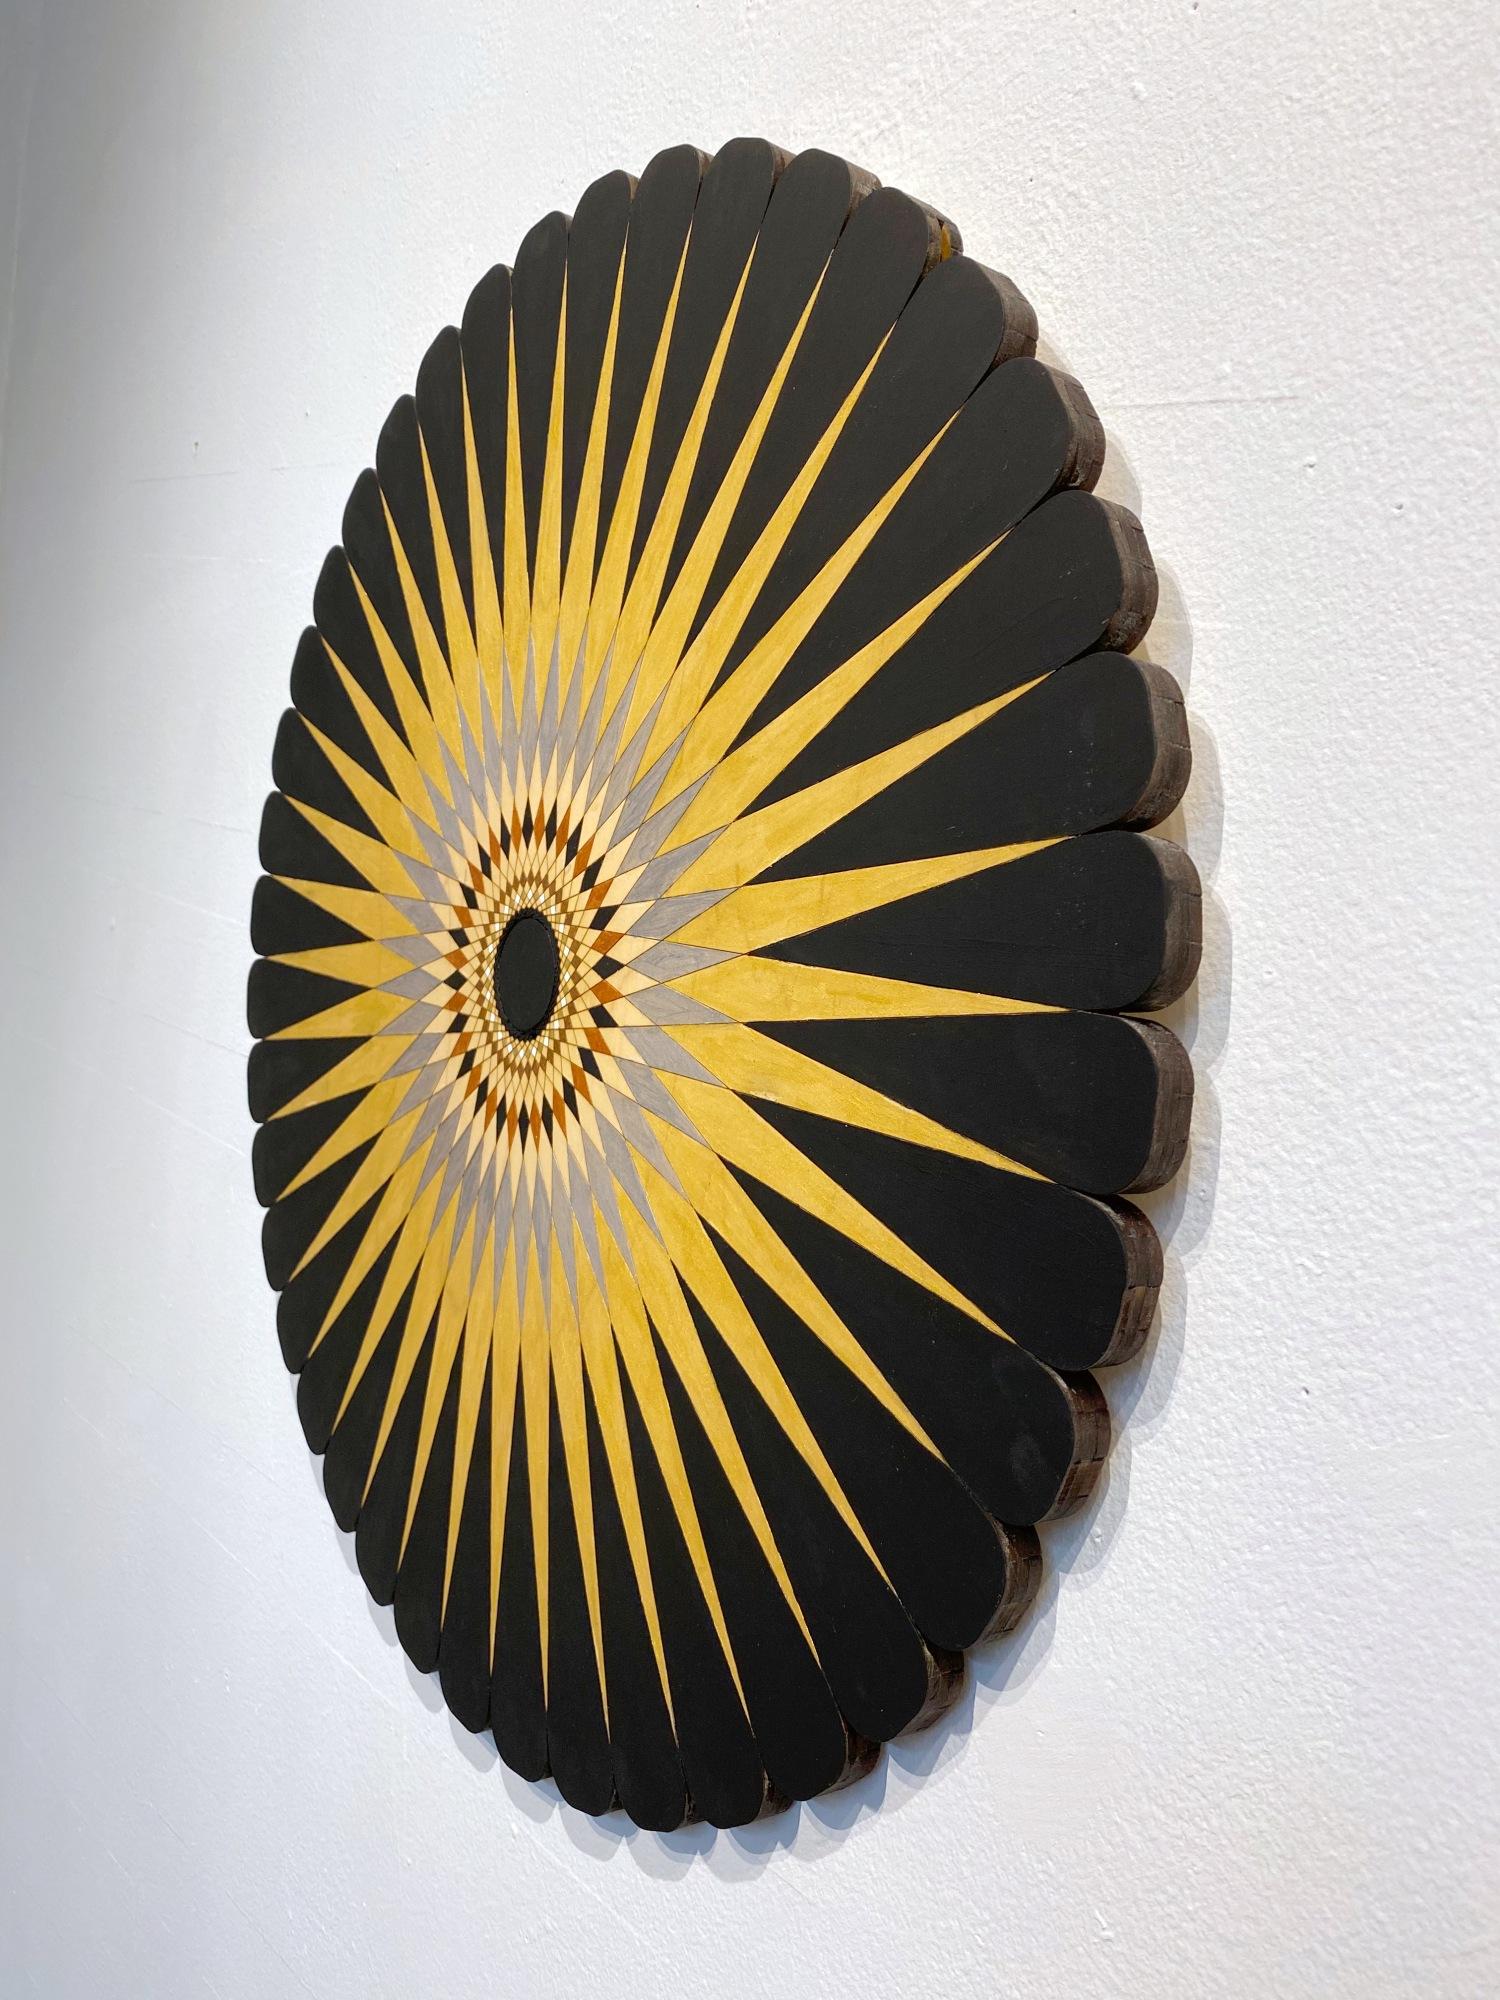 Starburst 1, Gold, yellow, silver, orange and black diagonal lines painted with Acrylic in a circular starburst shape. On Wood, mounts to a wall.  Ready to hang.  Signed by artist on verso

 Christine Romanell

ARTIST BIO
Christine Romanell’s